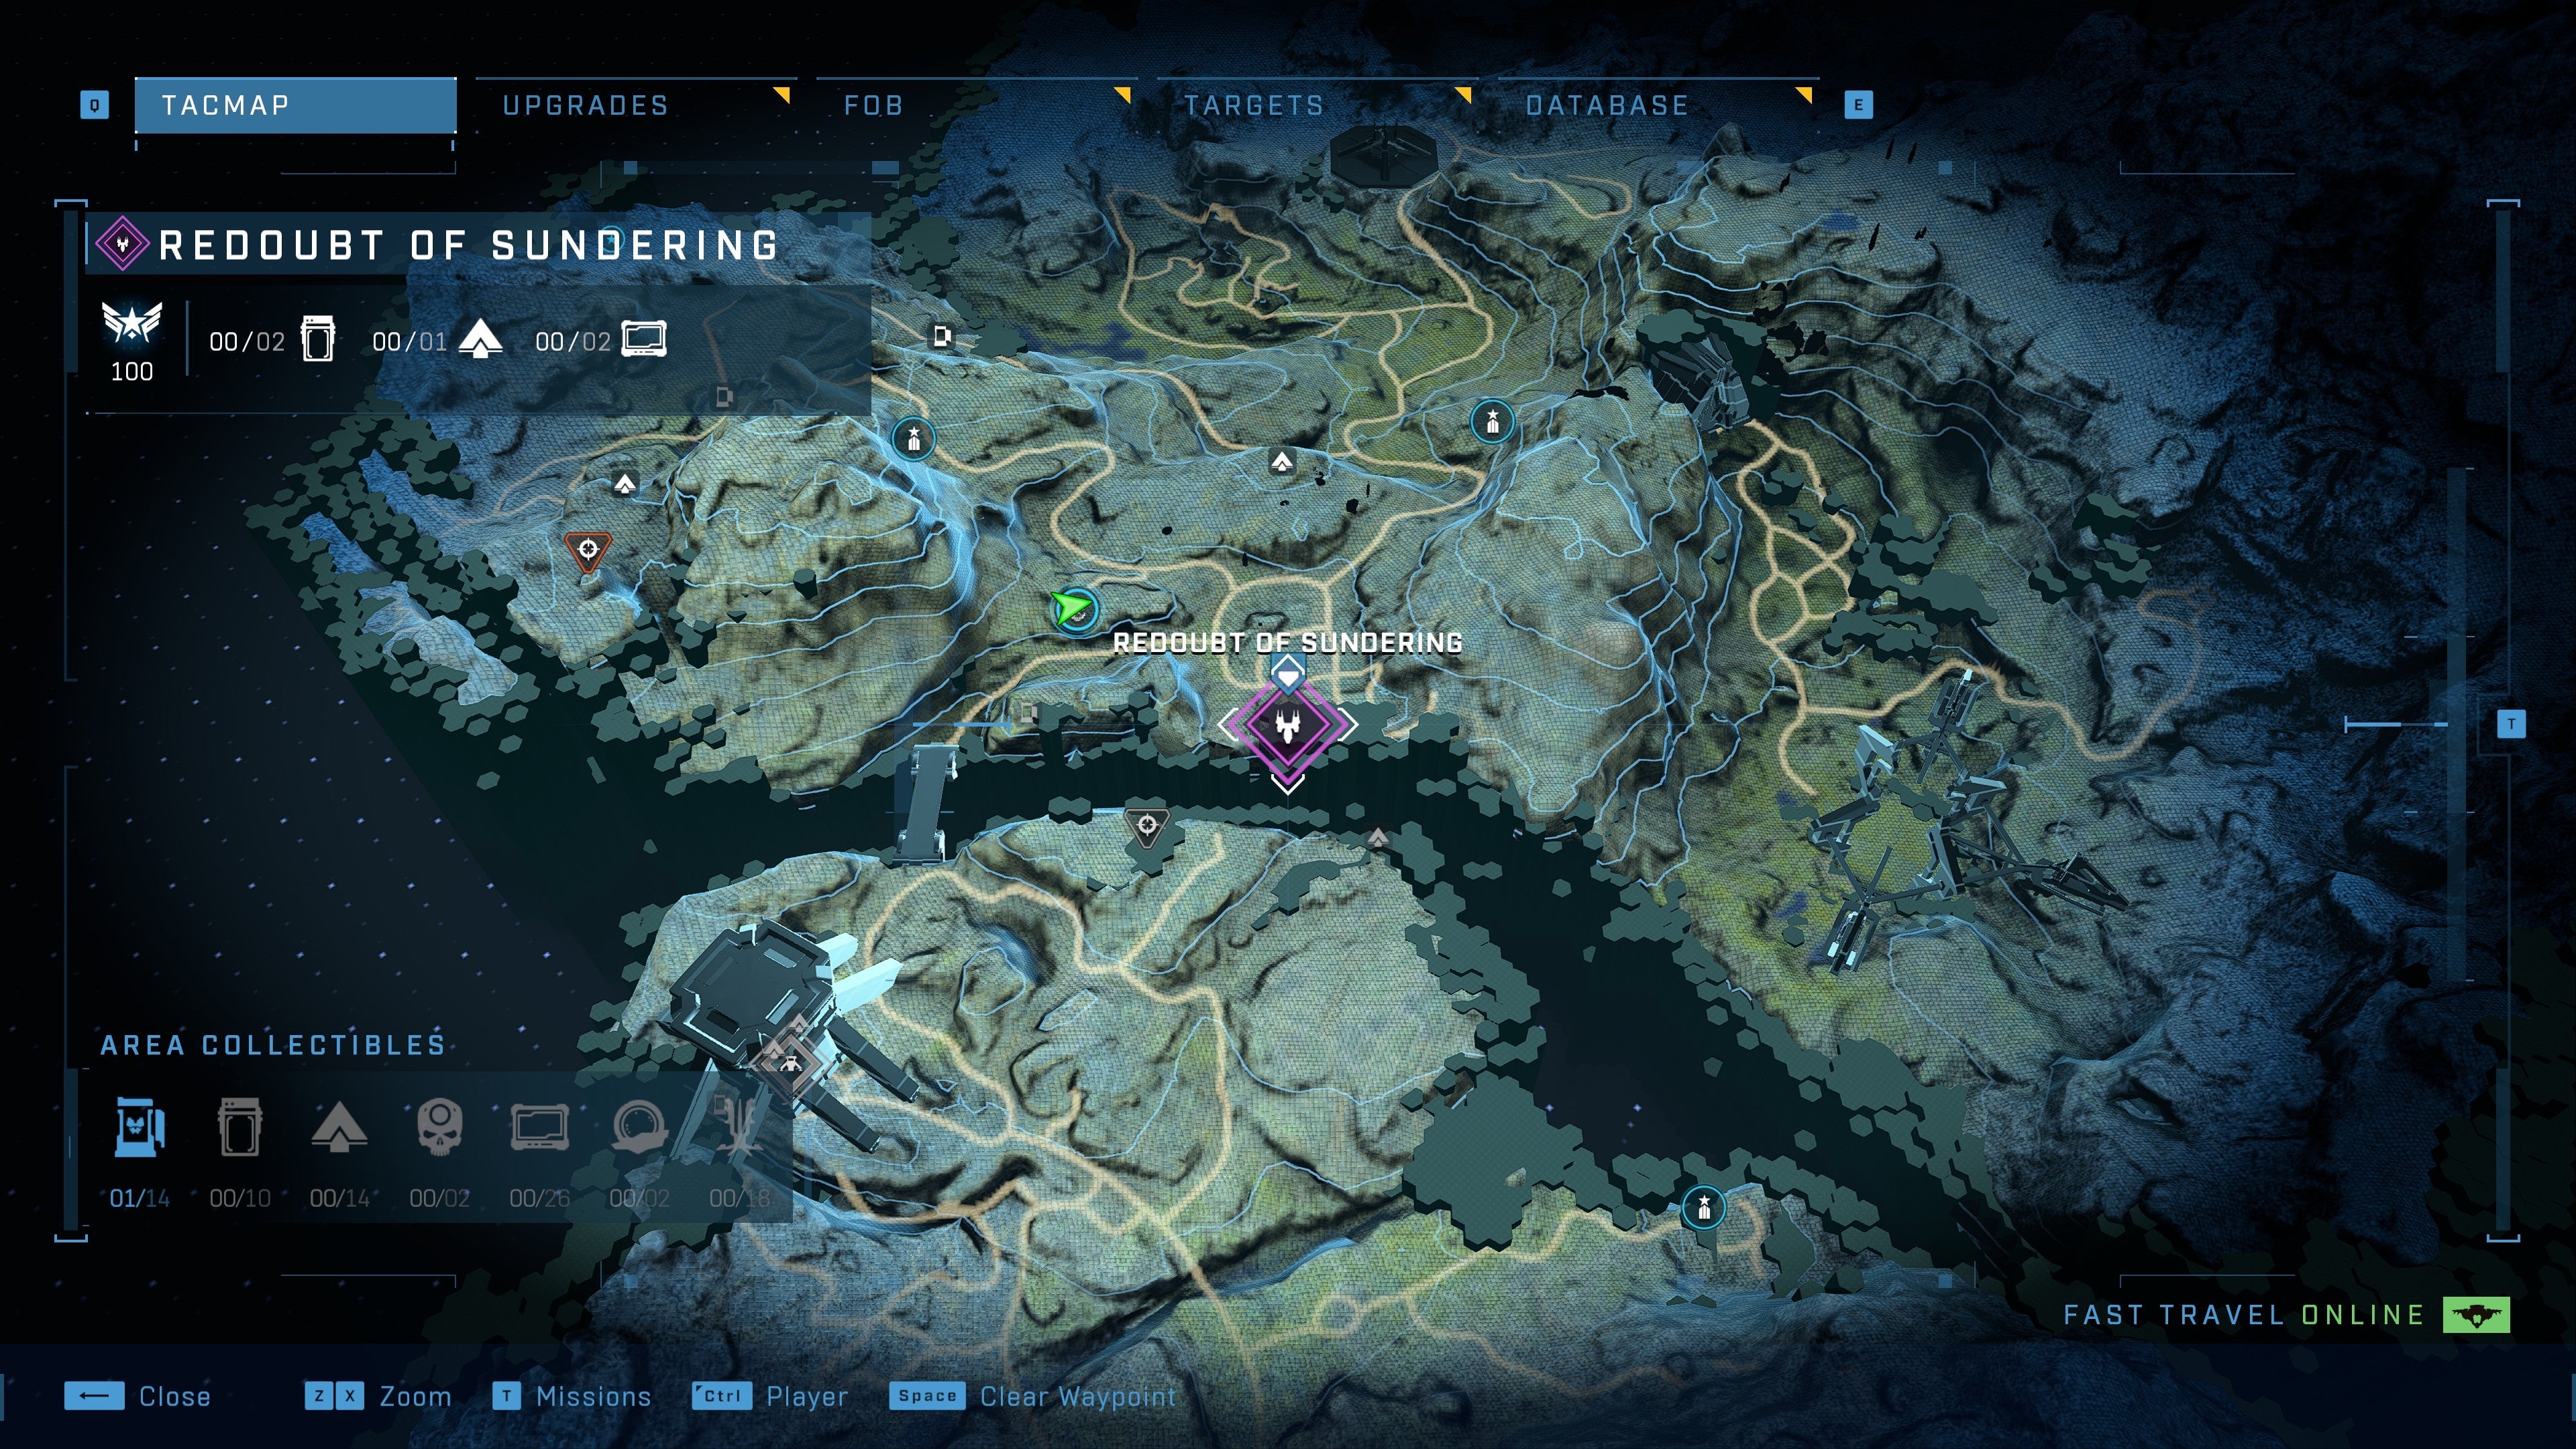 Redoubt of Sundering – Halo Infinite Guide